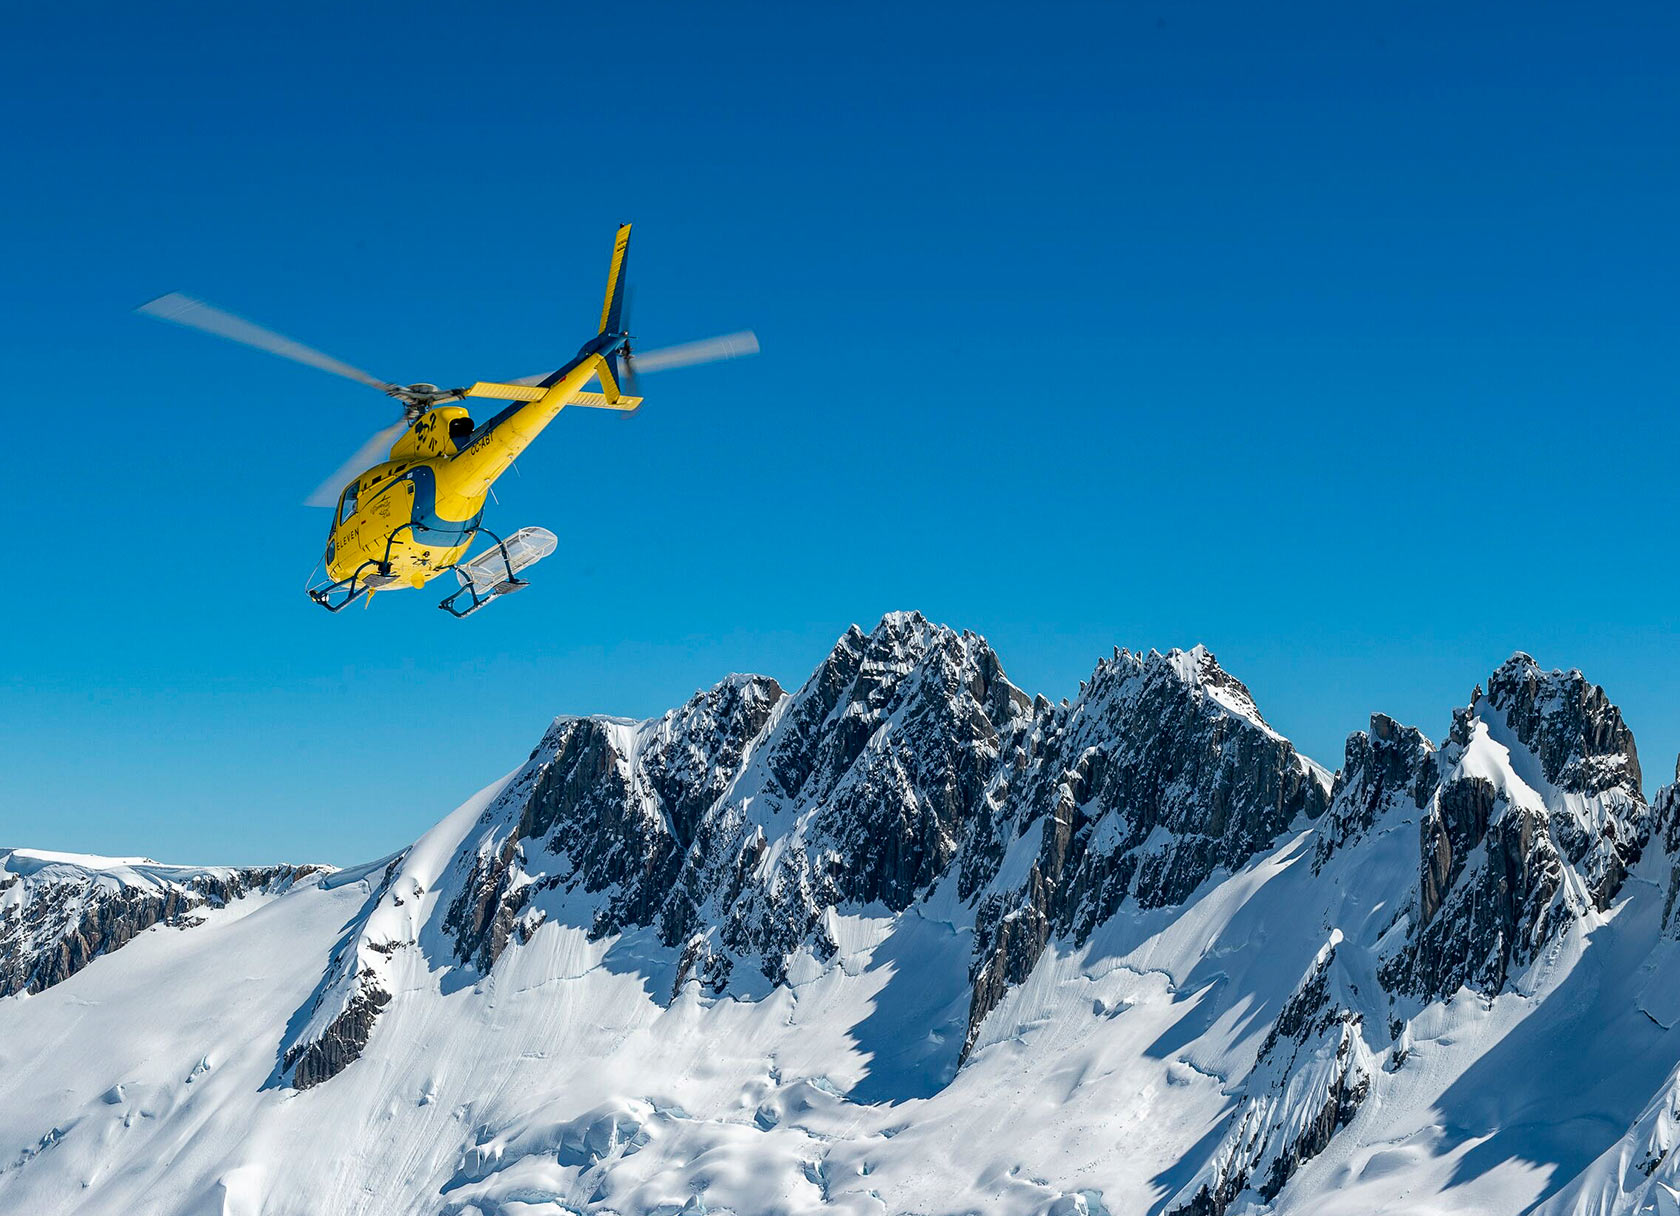 Yellow Eleven Experience Helicopter for Heli Skiing Adventure in Patagonia